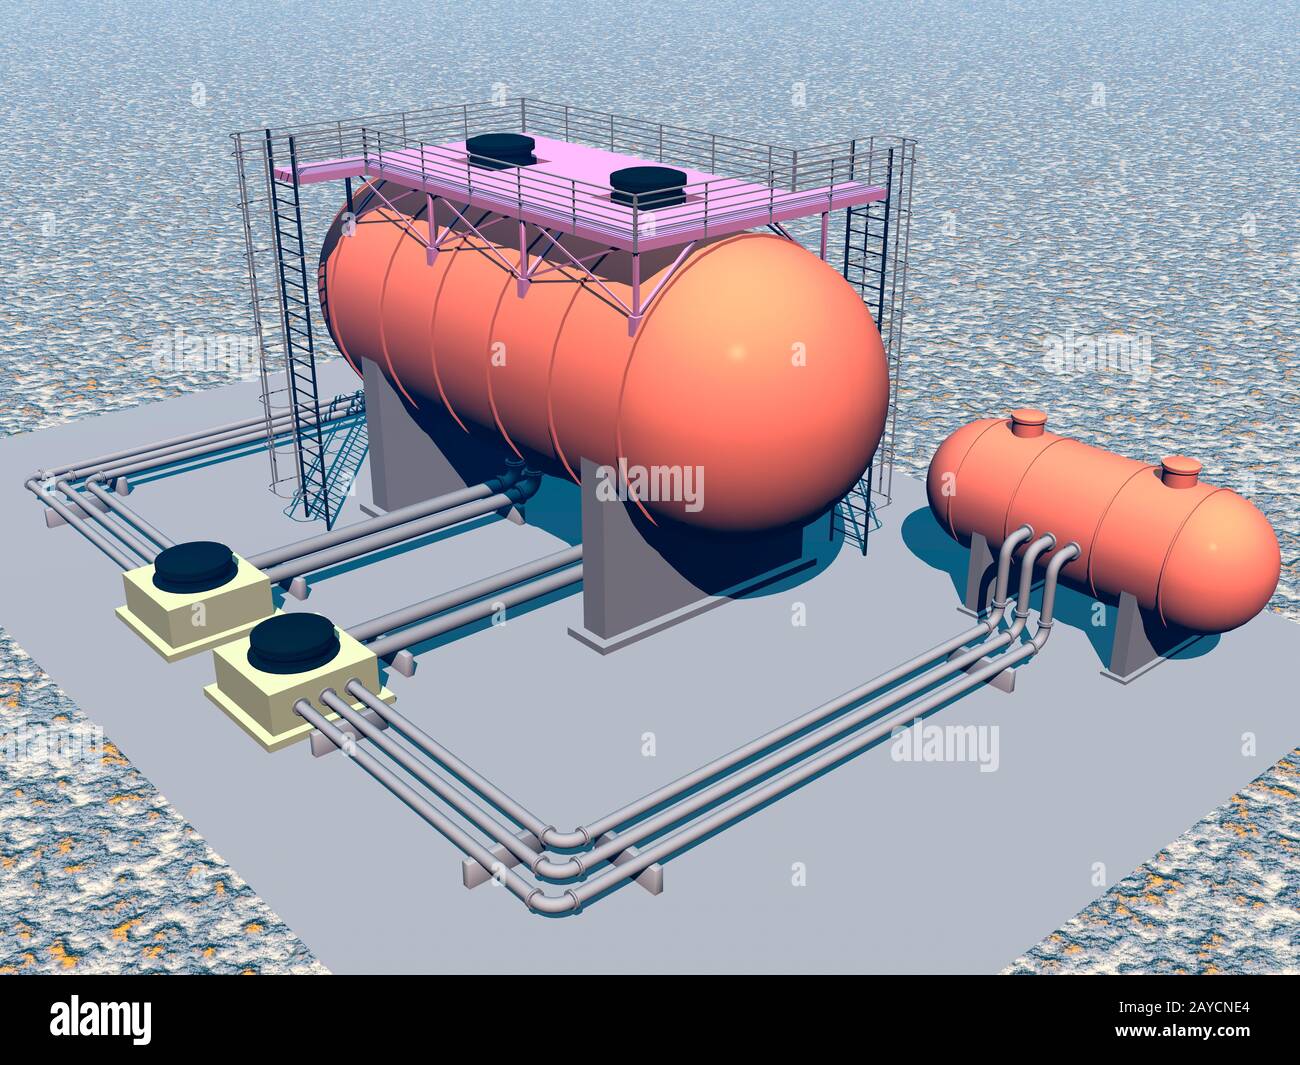 Industrial site with tanks and pipelines Stock Photo